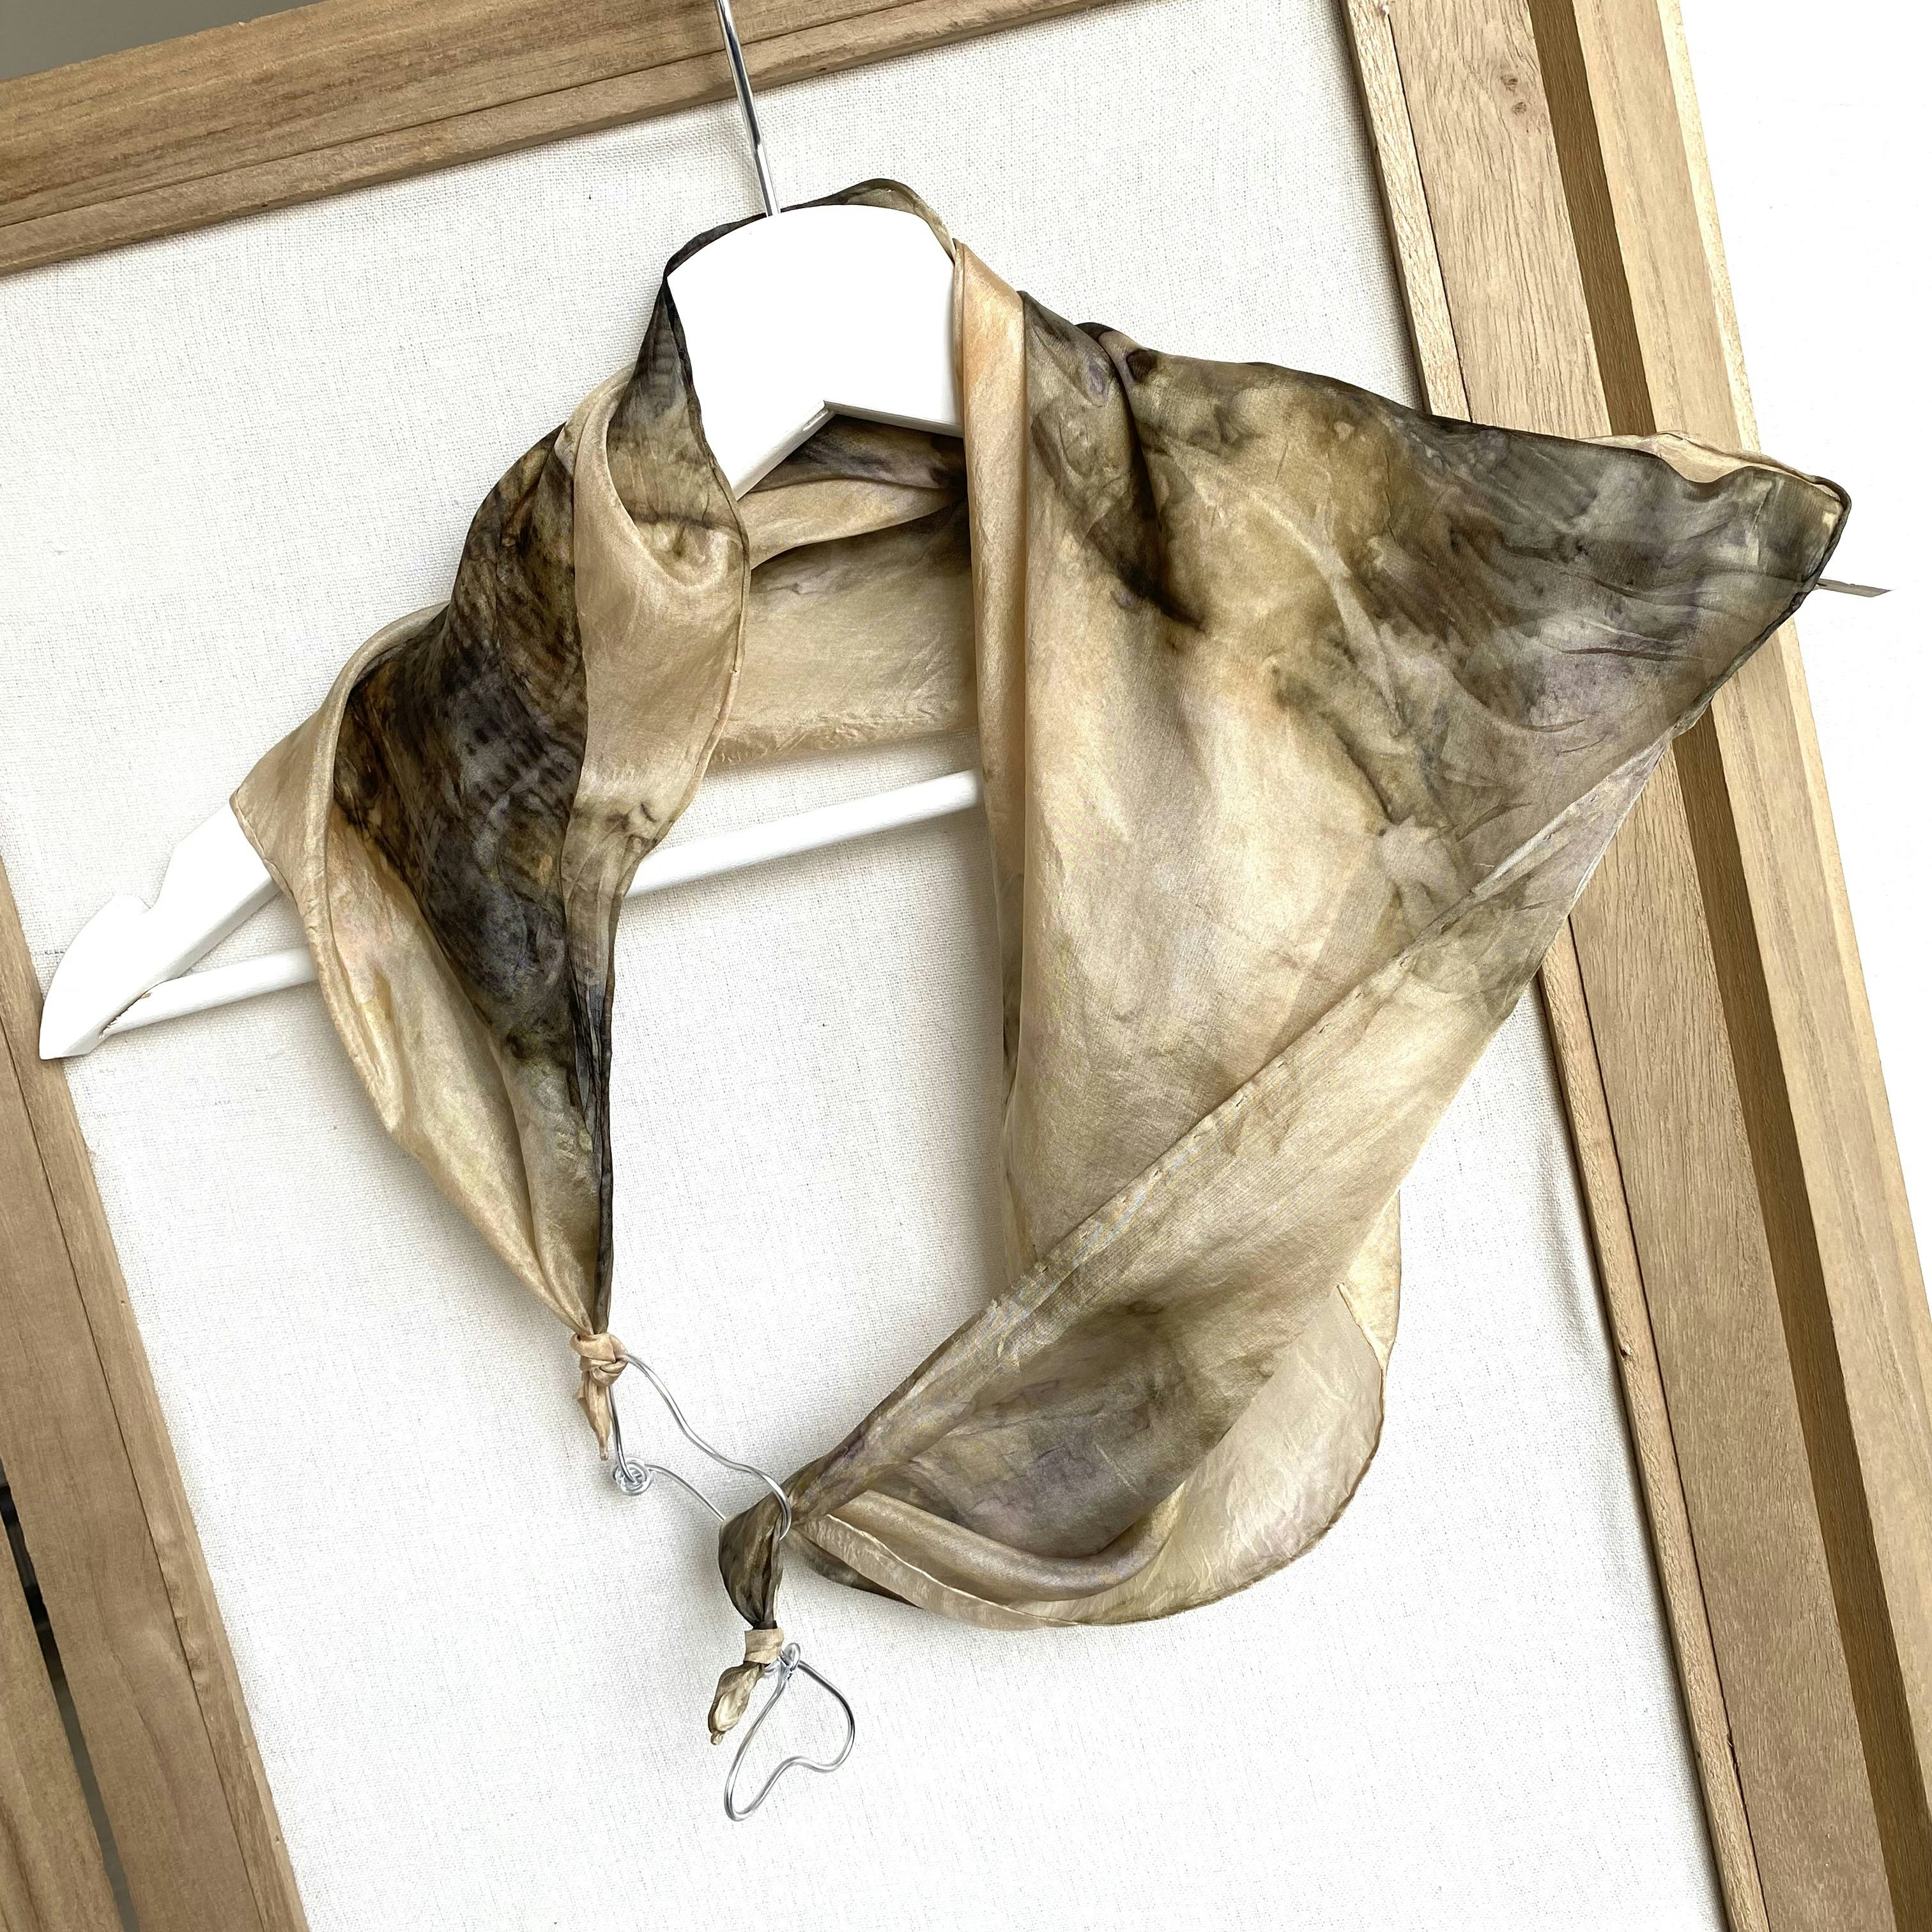 Jewelry silk scarf dyed with maple leaves, artisanal product for direct sale in Switzerland